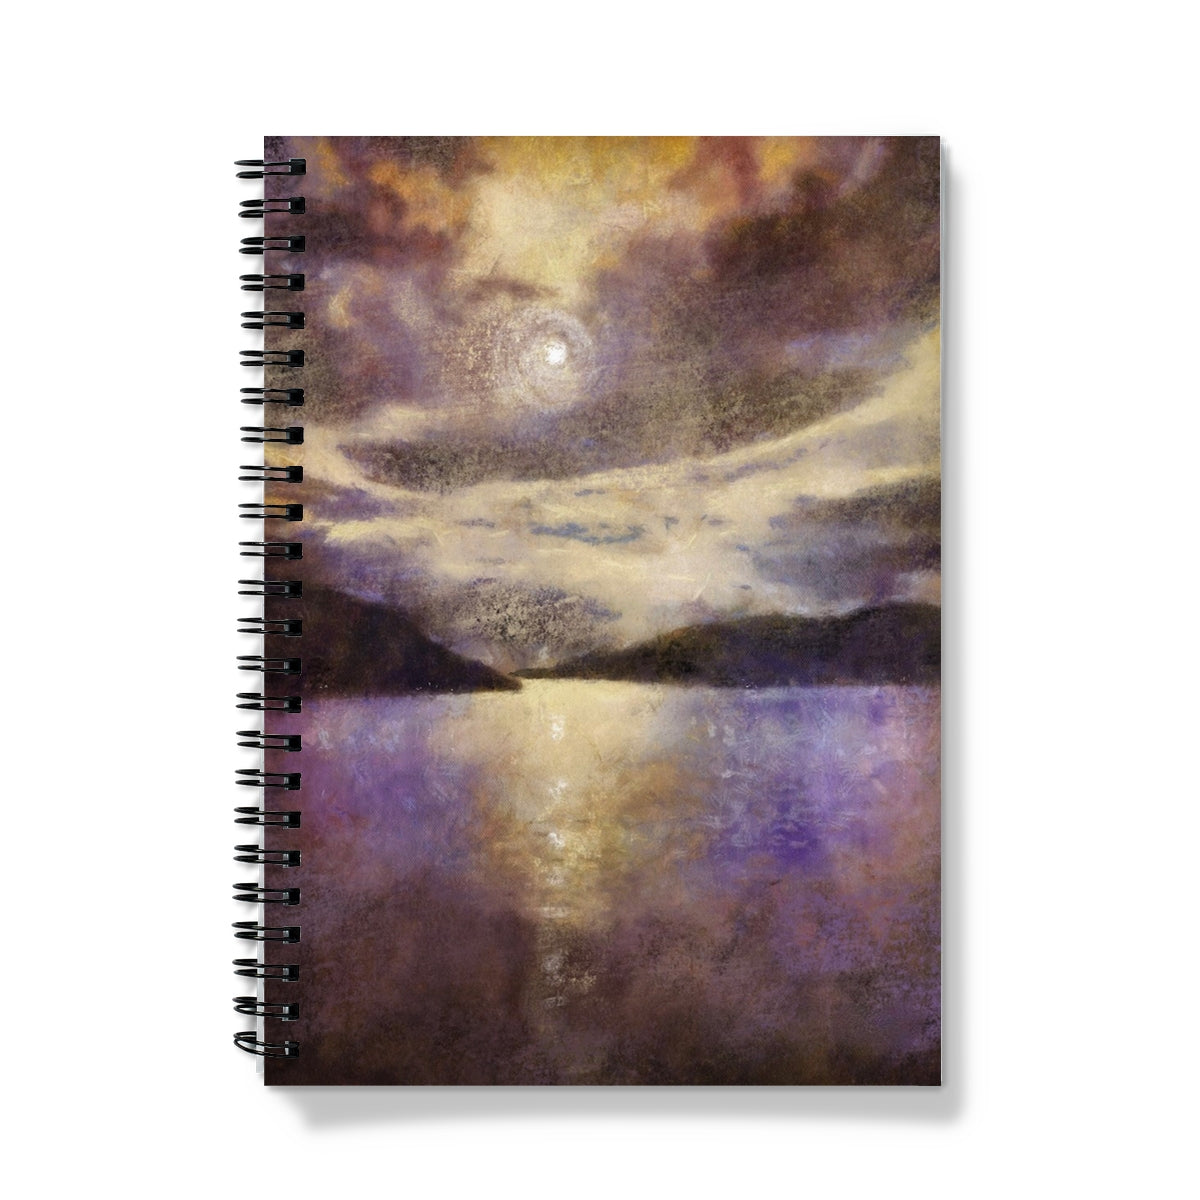 Moonlight Meets Lewis & Harris Art Gifts Notebook-Journals & Notebooks-Hebridean Islands Art Gallery-A5-Lined-Paintings, Prints, Homeware, Art Gifts From Scotland By Scottish Artist Kevin Hunter